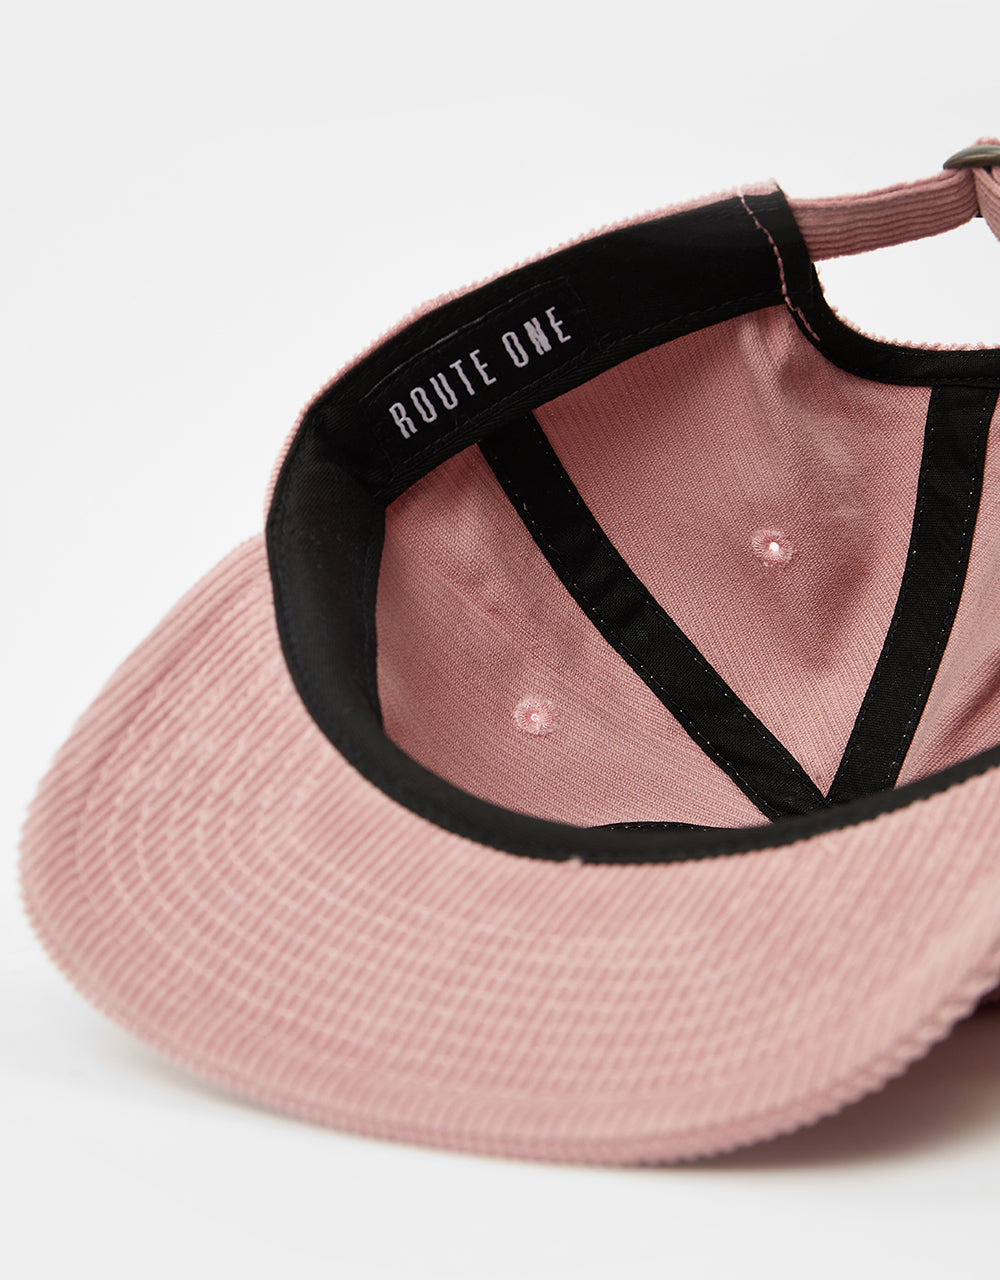 Route One Unstructured Cord 6 Panel Cap - Dusty Pink